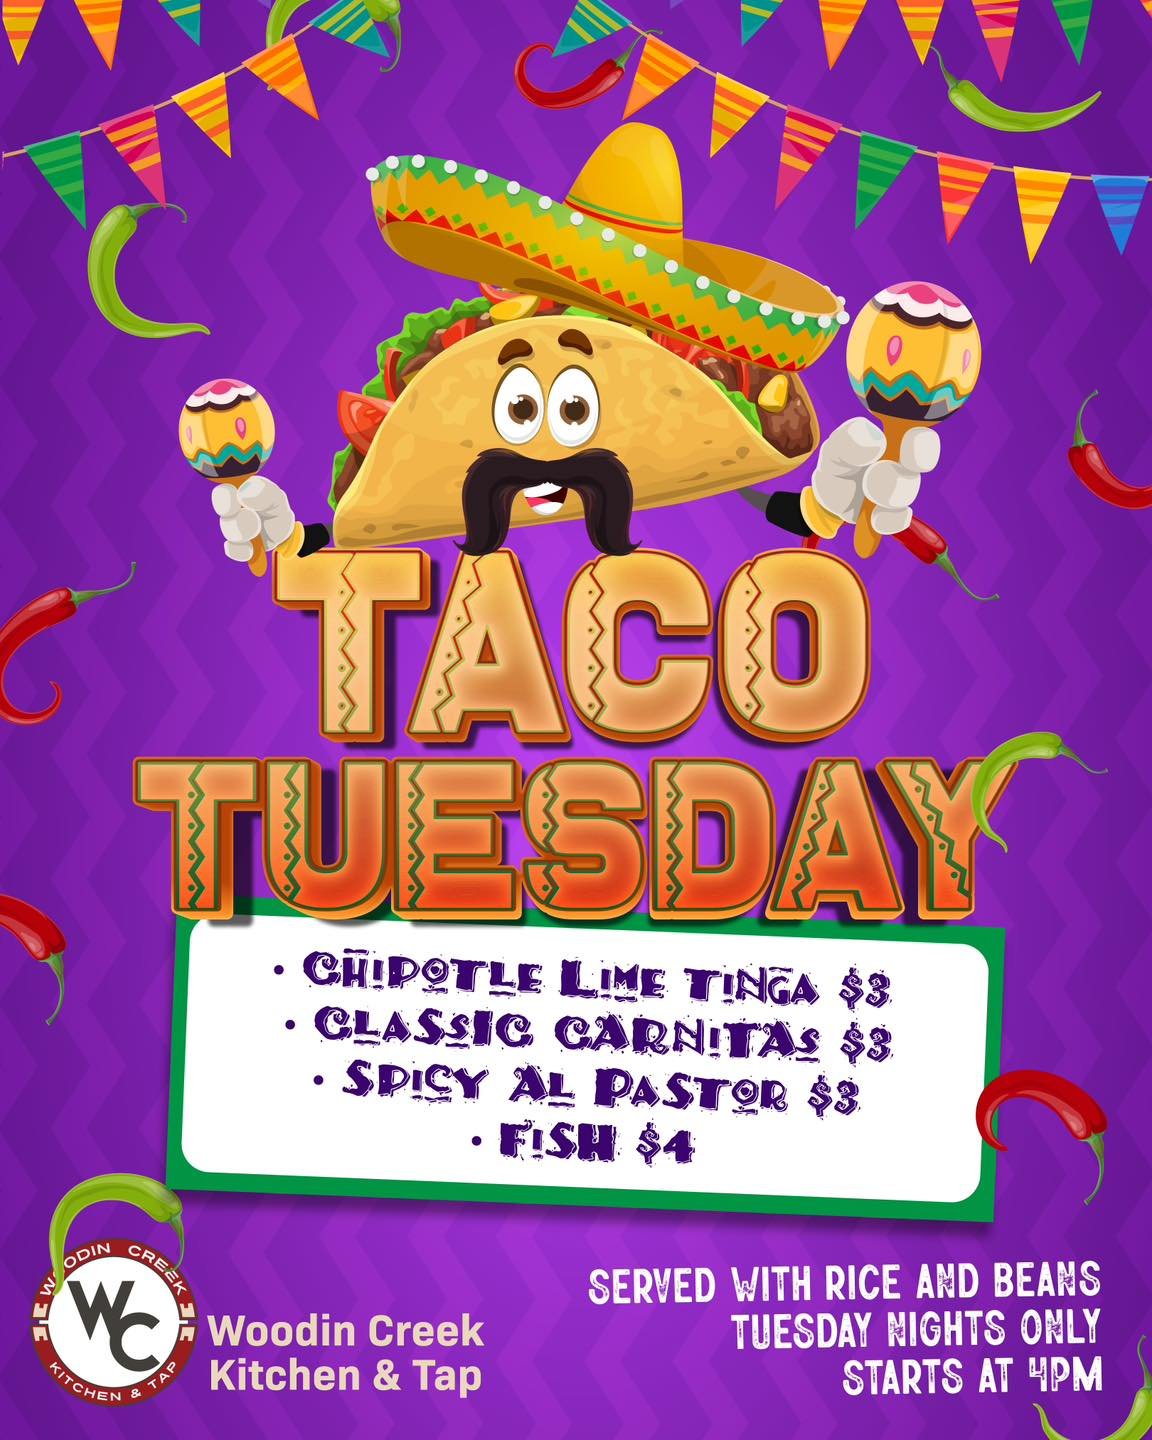 What does Tacos, and Trivia have in common? It all happens this Tuesday. Taco Tuesday starts at 4pm and Beat The Geek Trivia at 8pm. Come on down and enjoy the great food and fun!